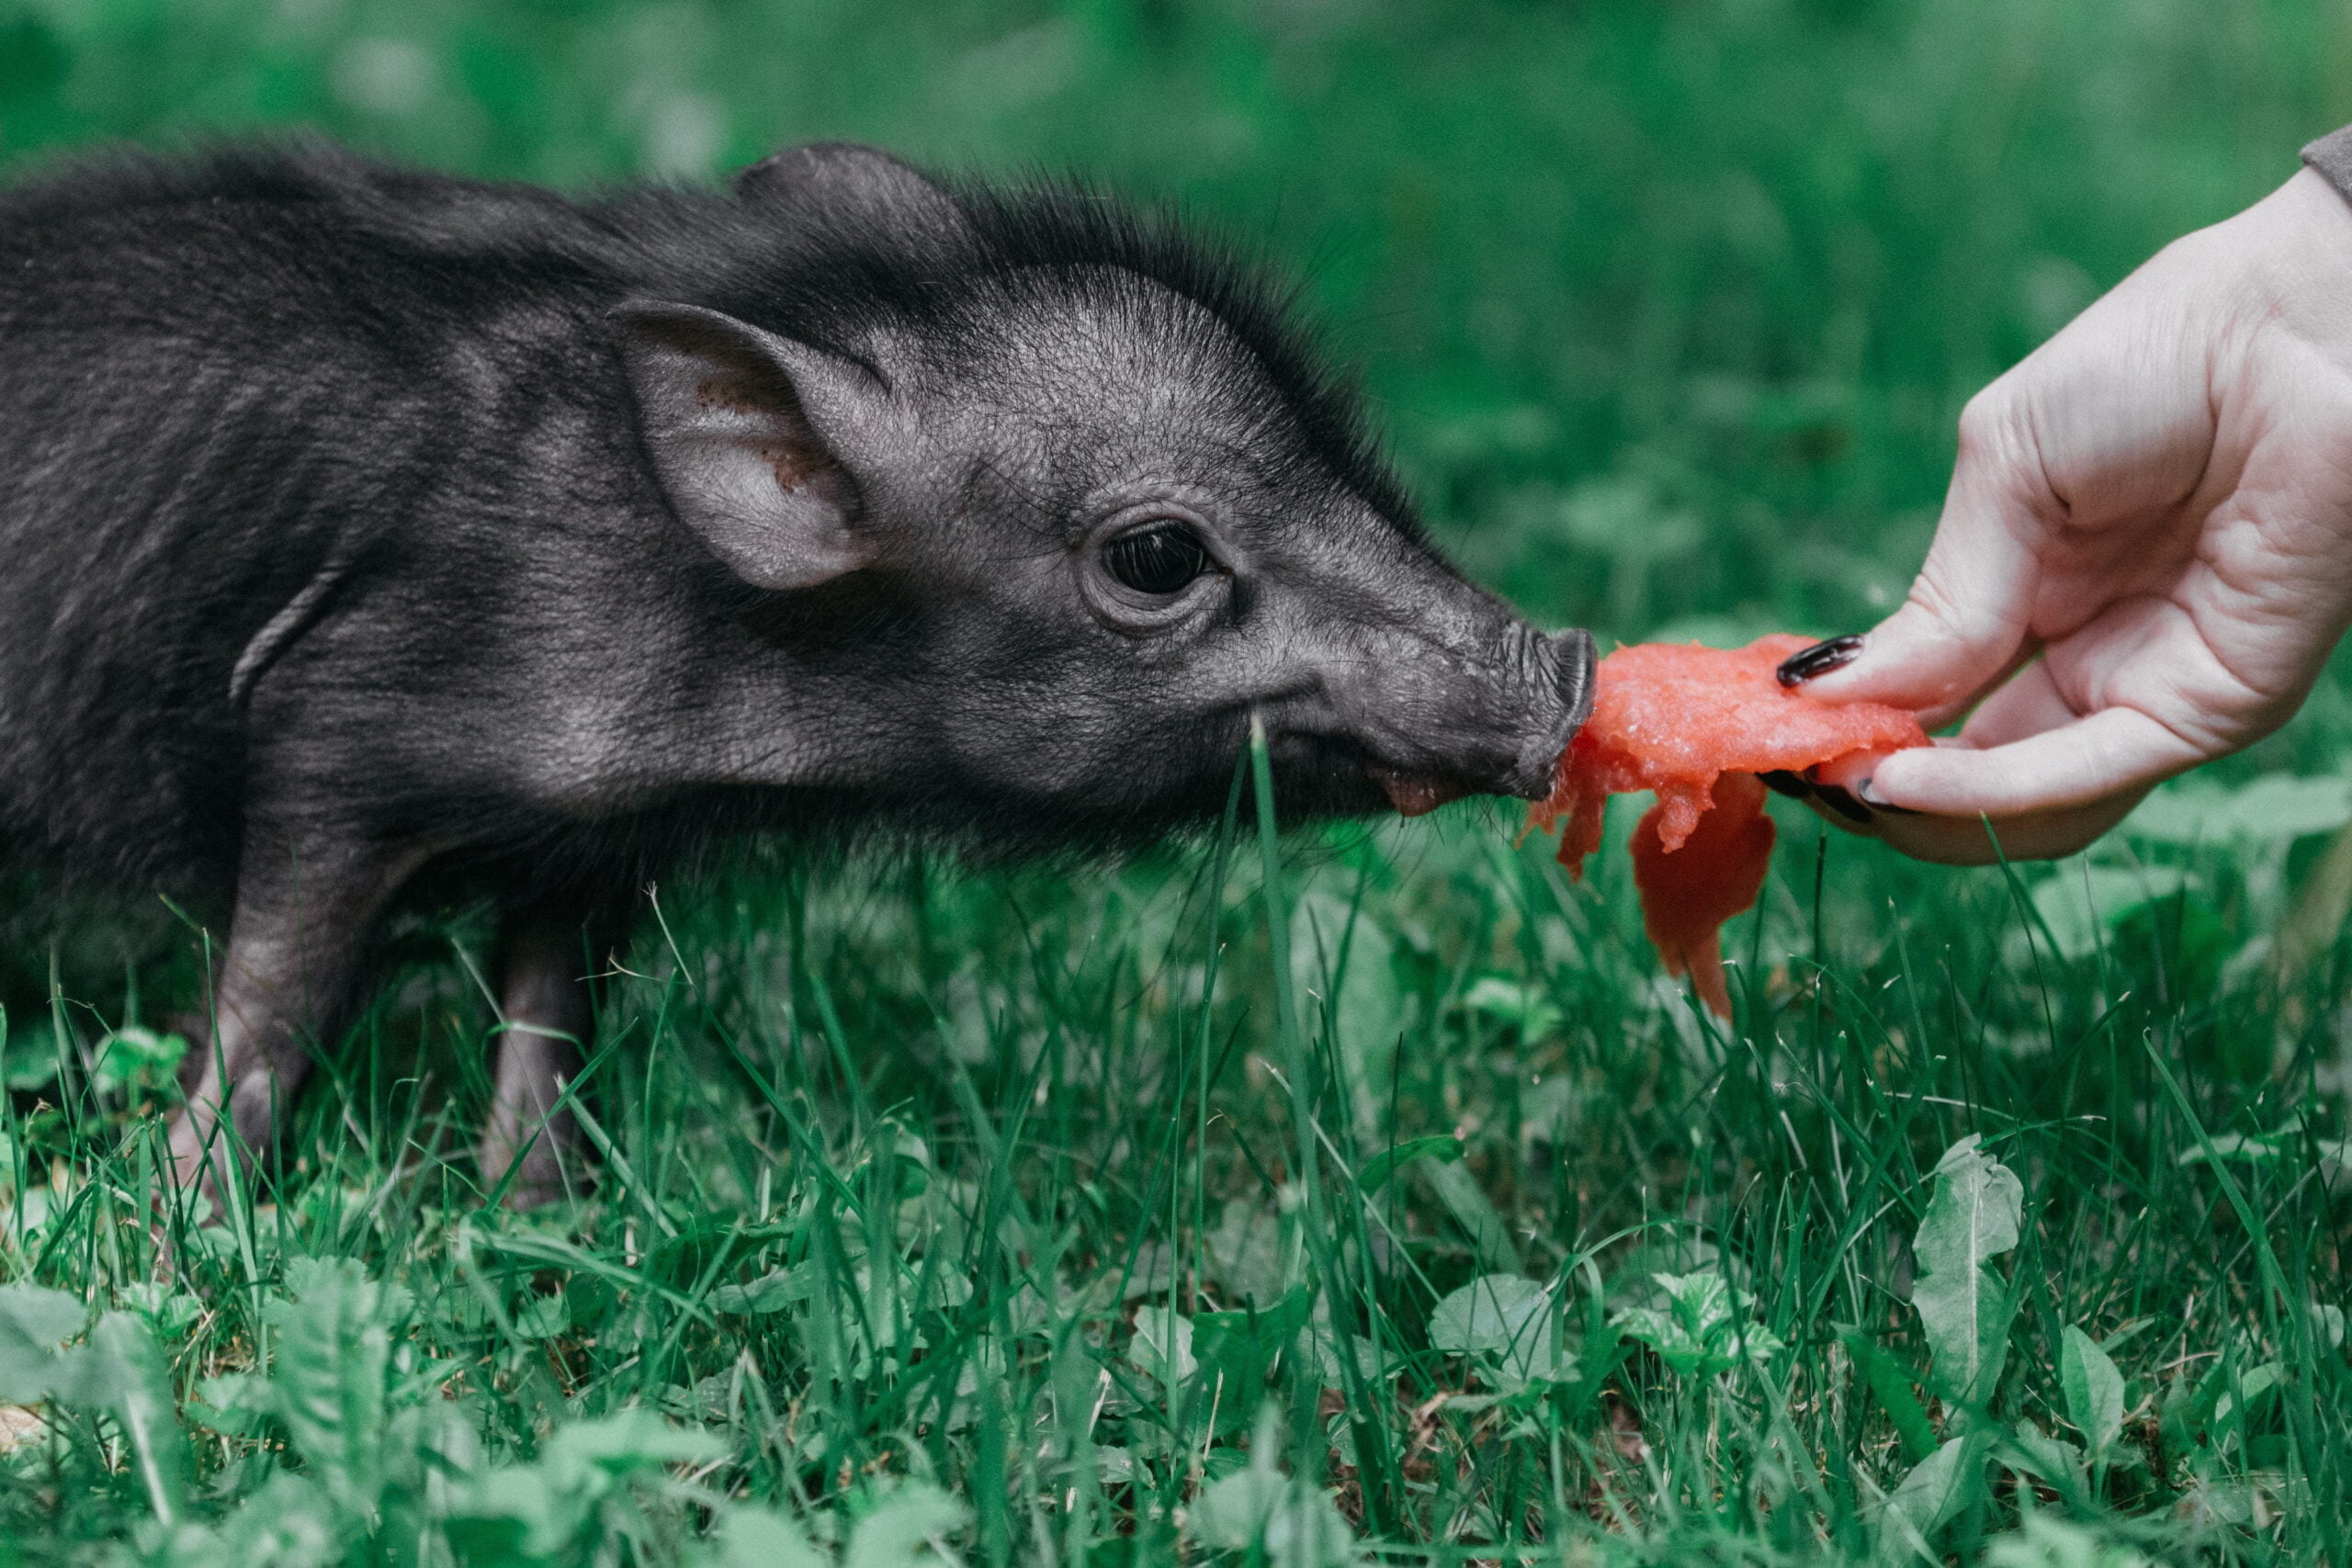 AI for pigs: Grunt analysis to promote animal welfare